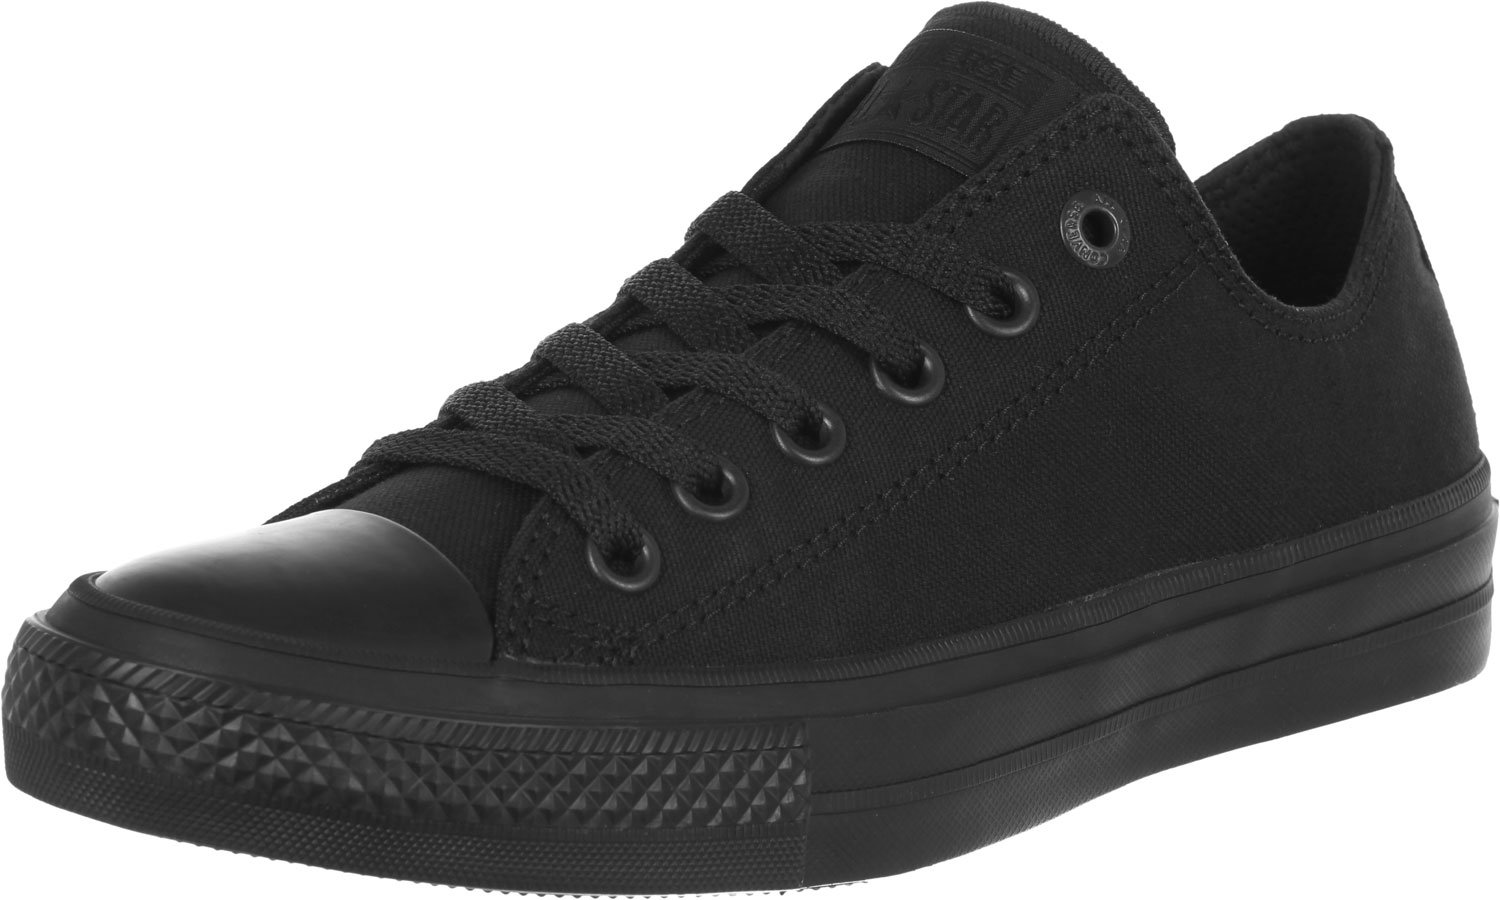 Converse Unisex Adults' Chuck Taylor All Star Ii Low-Top Sneakers